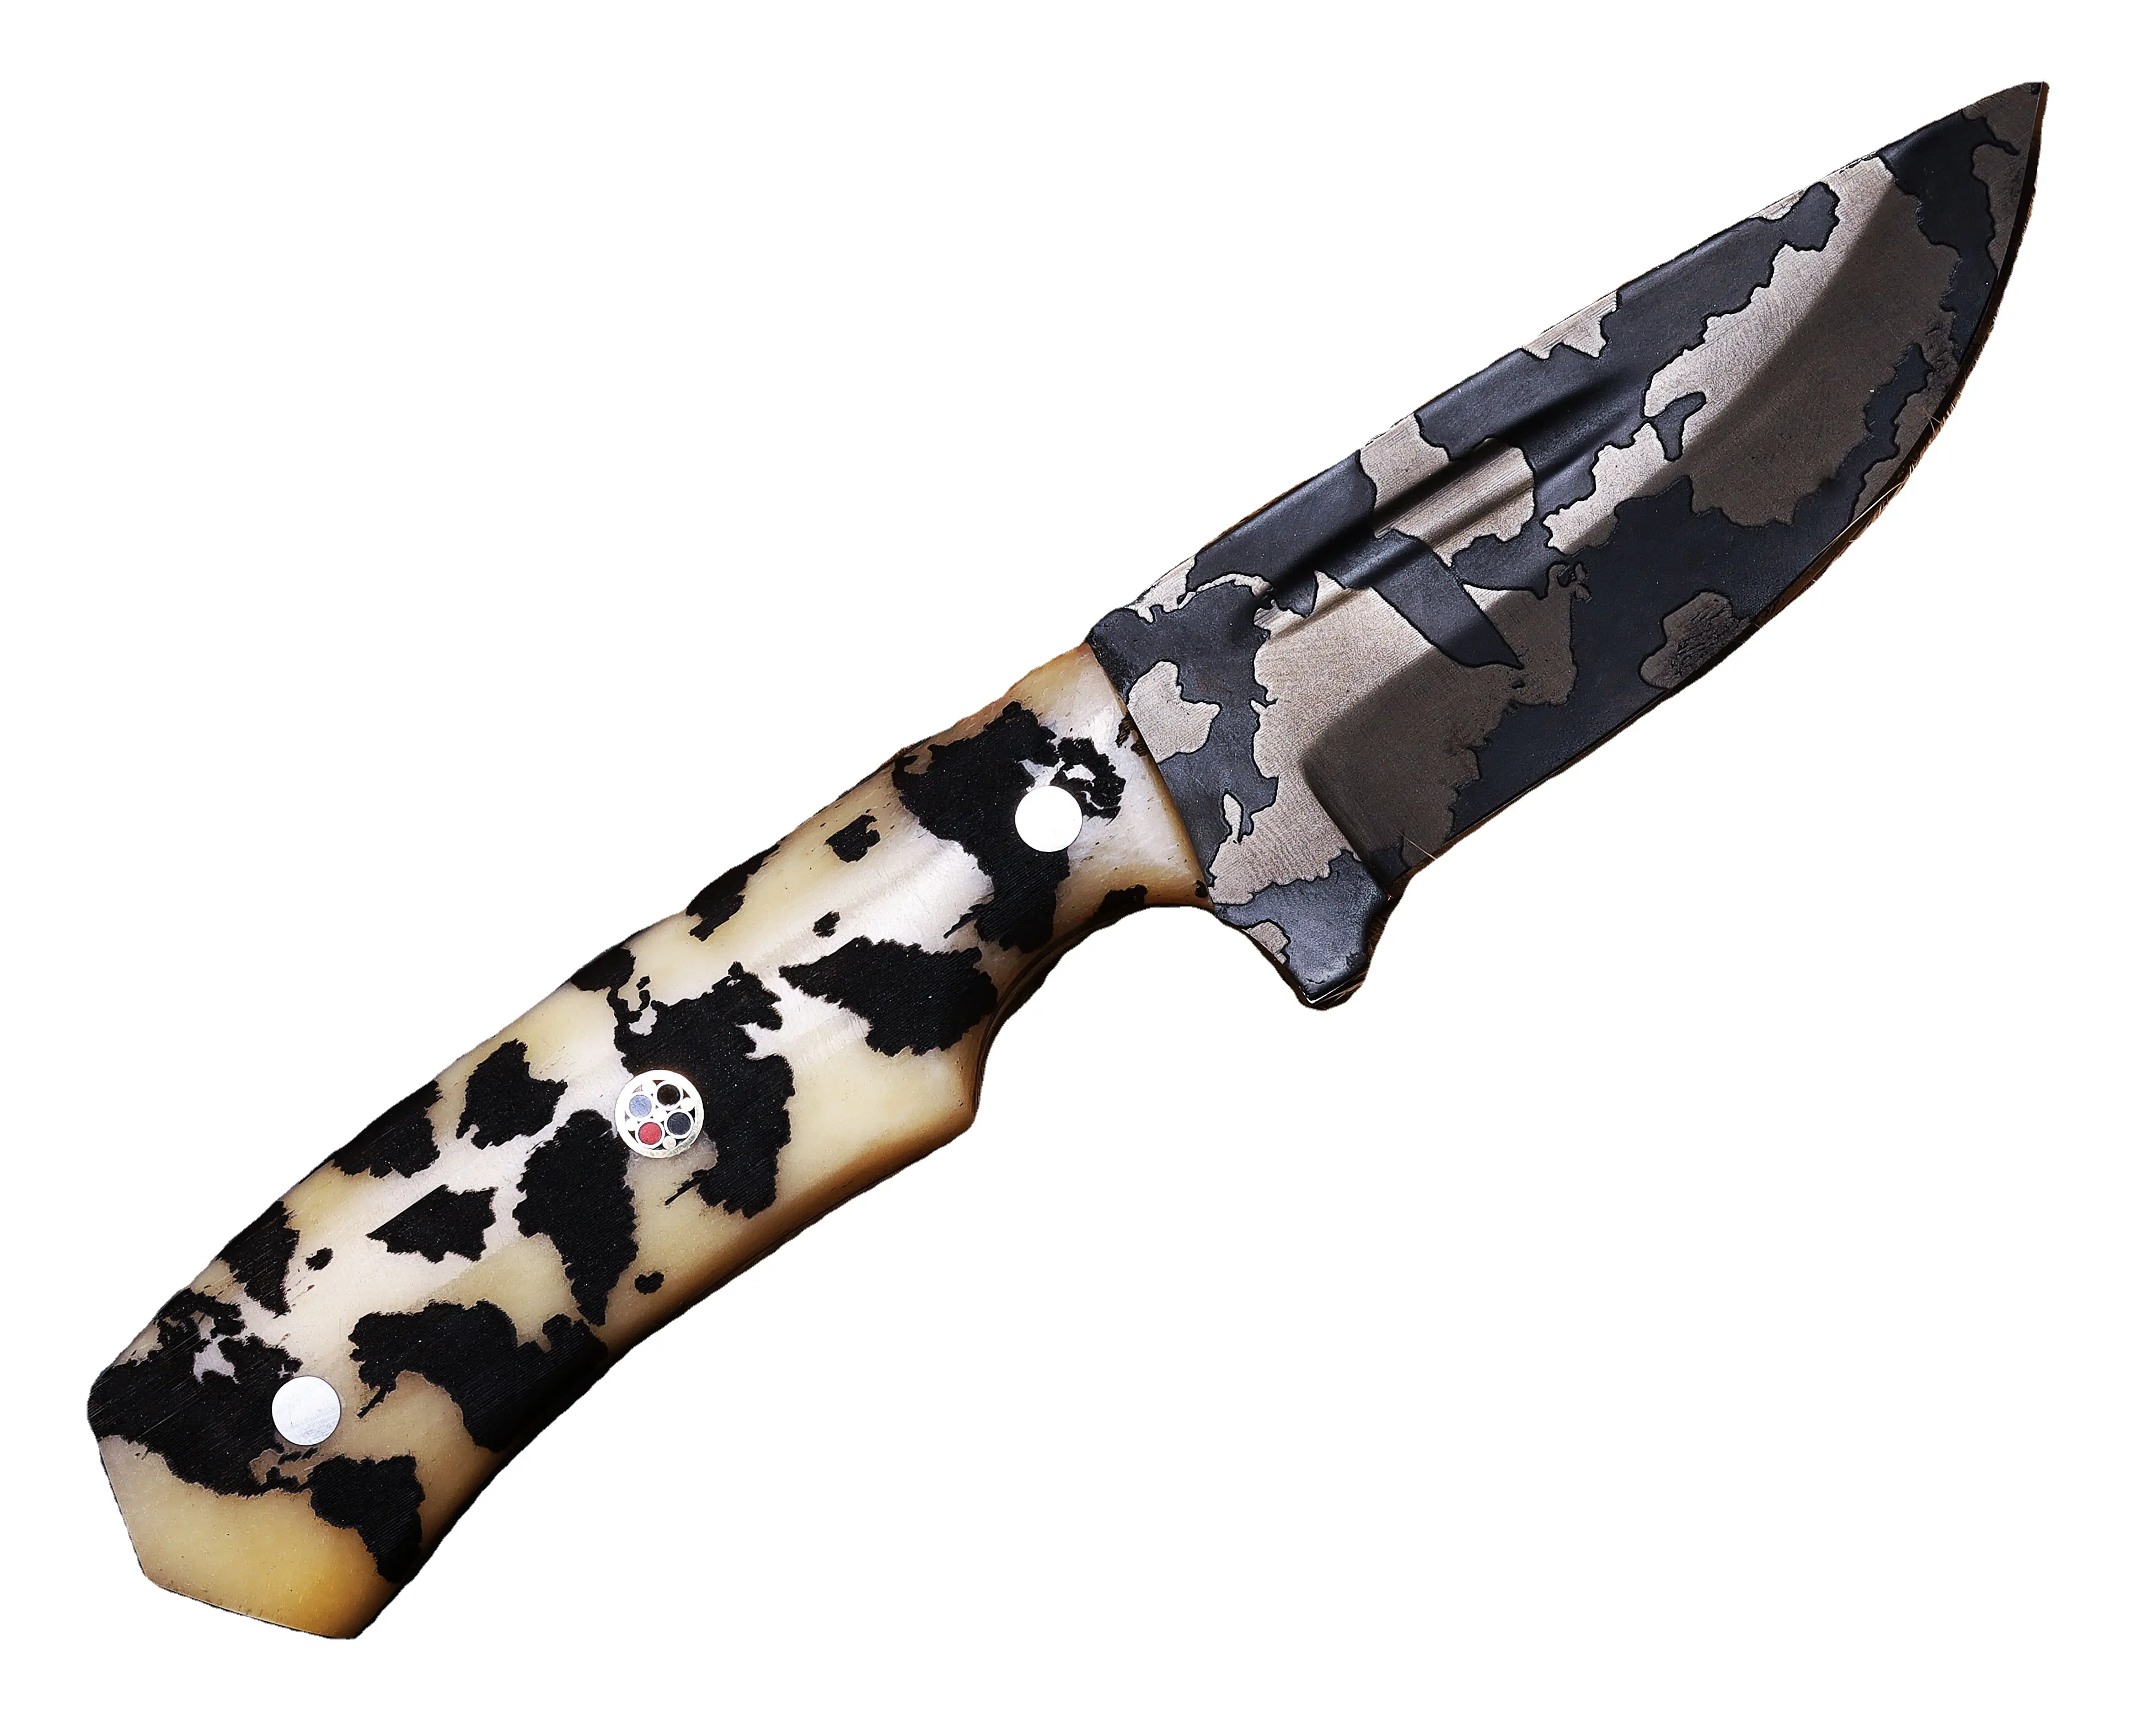 7.5" Bone handle high carbon steel black coated laser worked full tang hunting knife with freeorigional cow hide leather cover